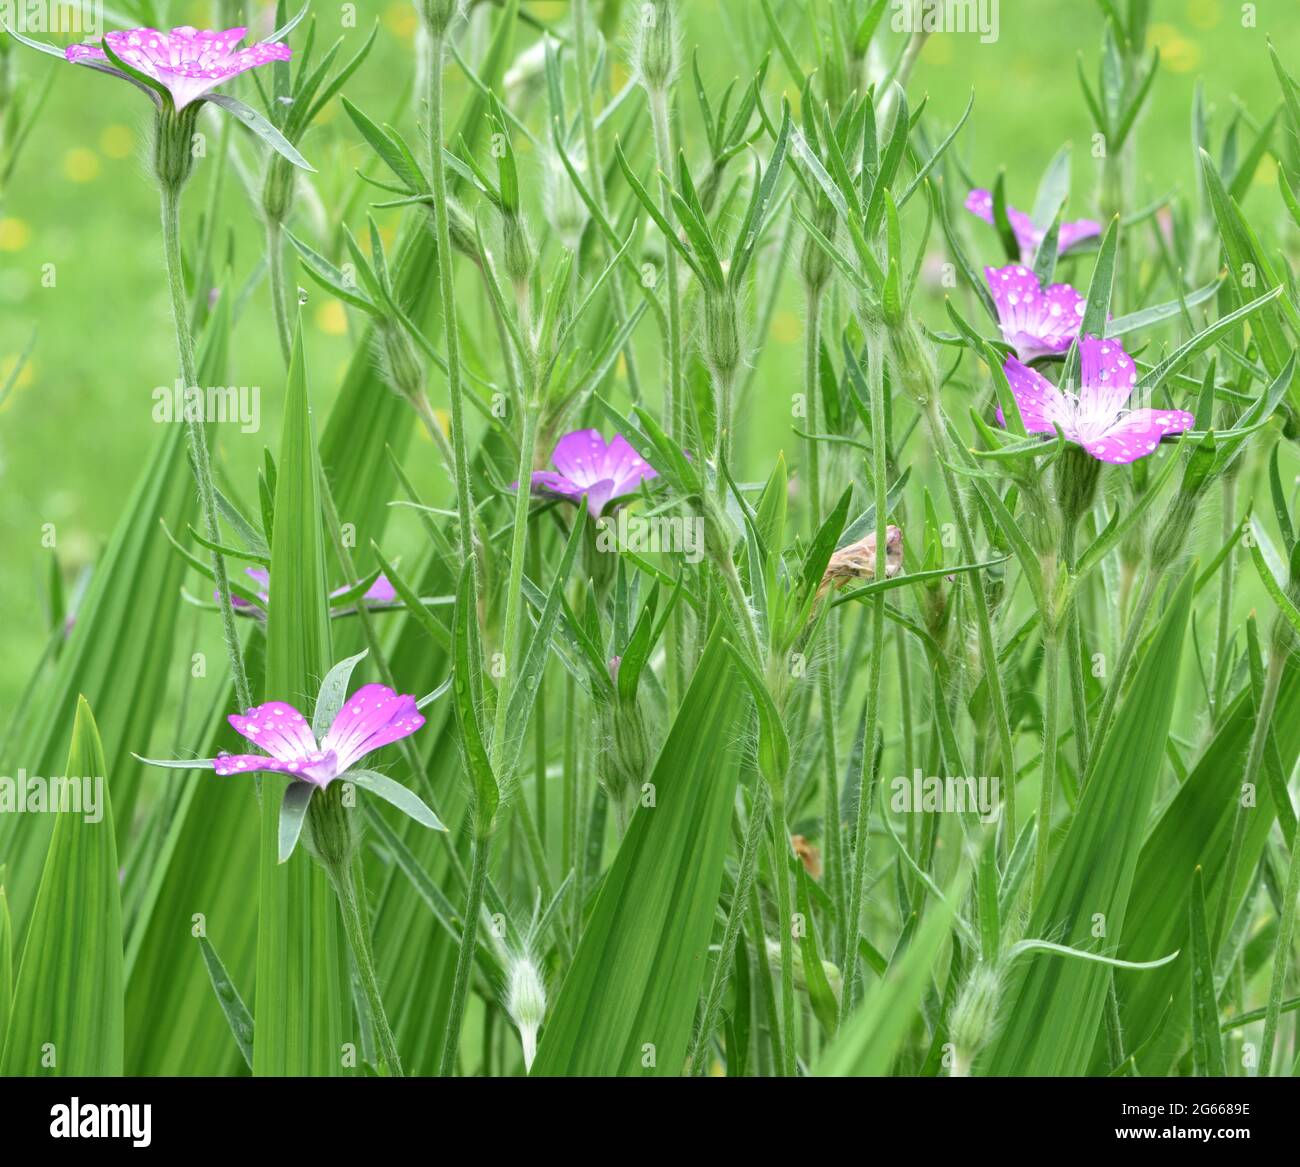 The five-petalied pink flowers of corncockle (Agrostemma githago) with their distinctive long pointed sepals Stock Photo